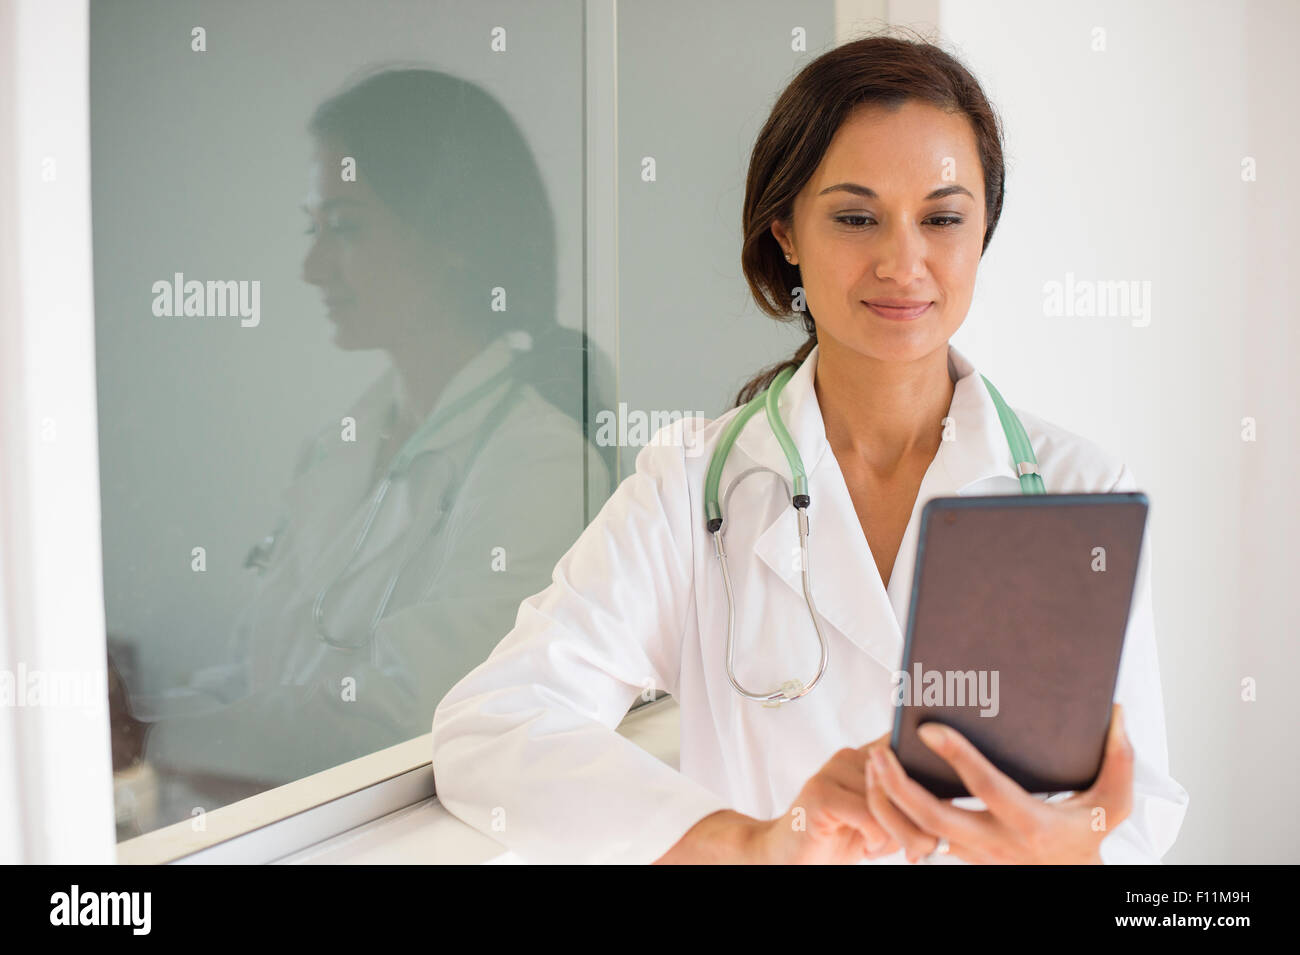 Mixed Race doctor using digital tablet Banque D'Images